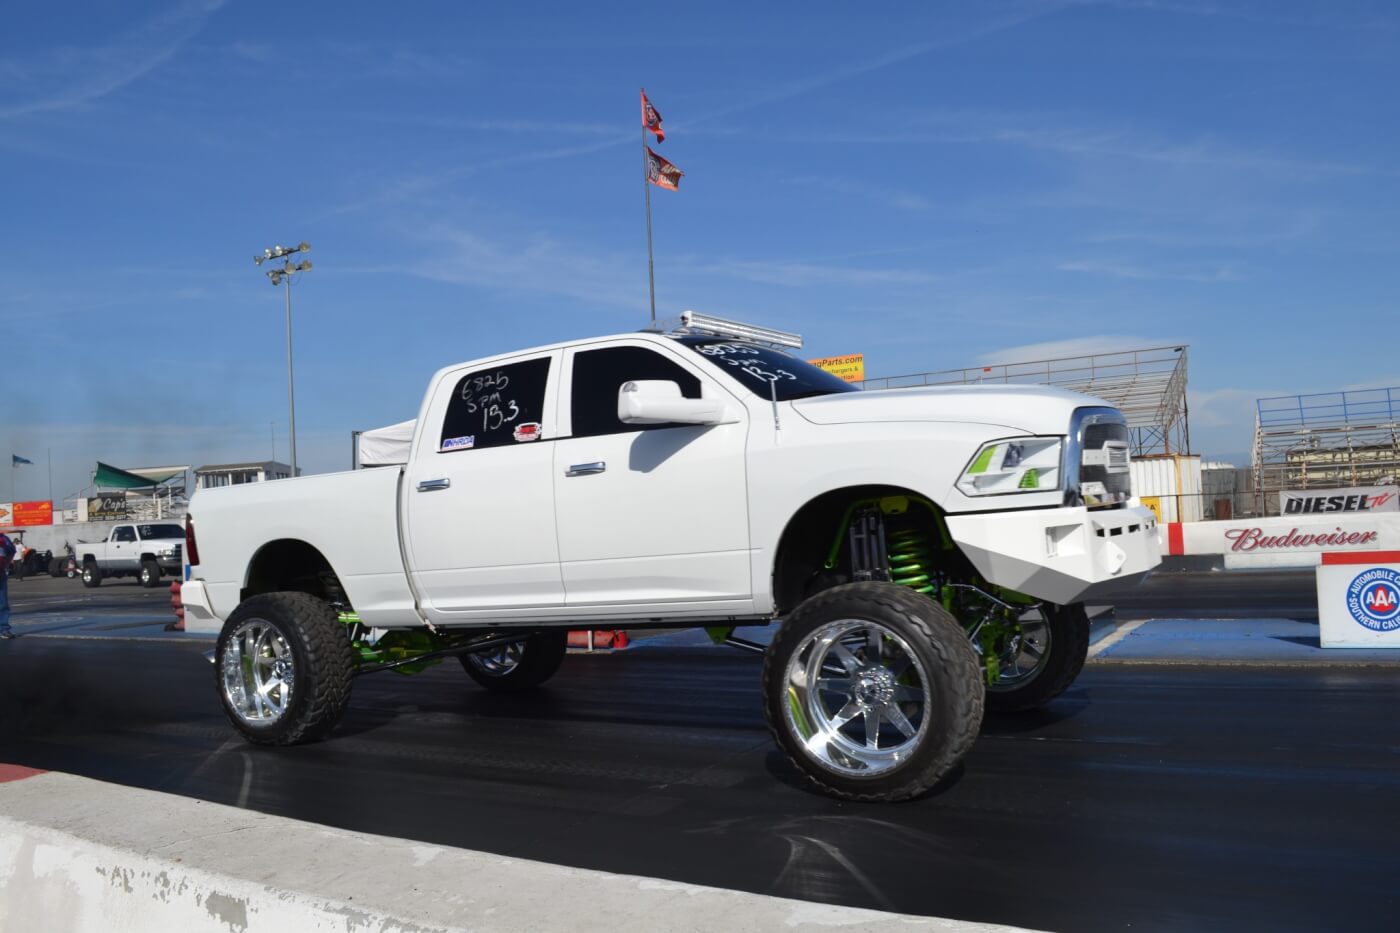 At the track, Joey's Ram rockets off the line with 1.8-second 60-foot times thanks to the 4.88 gears. Despite the heft, aerodynamic resistance, and rotating weight, the truck regularly clicks off mid ‘13s at the drag strip (with barely any smoke).